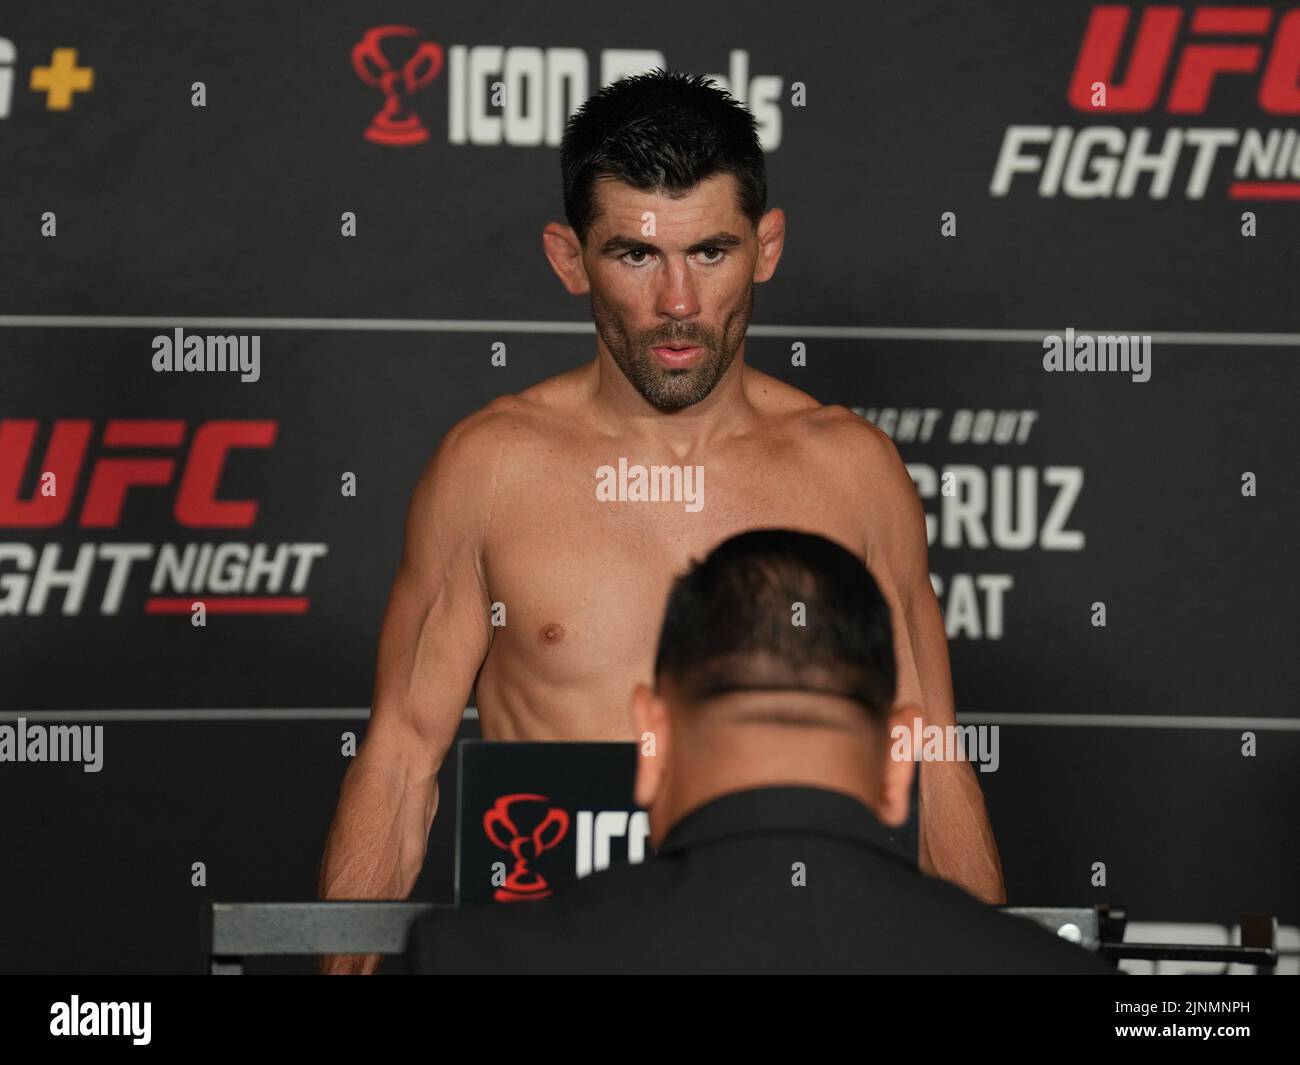 San Diego, USA. 12th Aug, 2022. SAN DIEGO, CA - August 12: Dominick Cruz  steps on the scale for the official weigh-in at the Sheraton San Diego Hotel & Marina for UFC Fight Night - Vera vs Cruz : Official Weigh-in on August 12, 2022 in SAN DIEGO, United States. (Photo by Louis Grasse/PxImages) Credit: Px Images/Alamy Live News Stock Photo